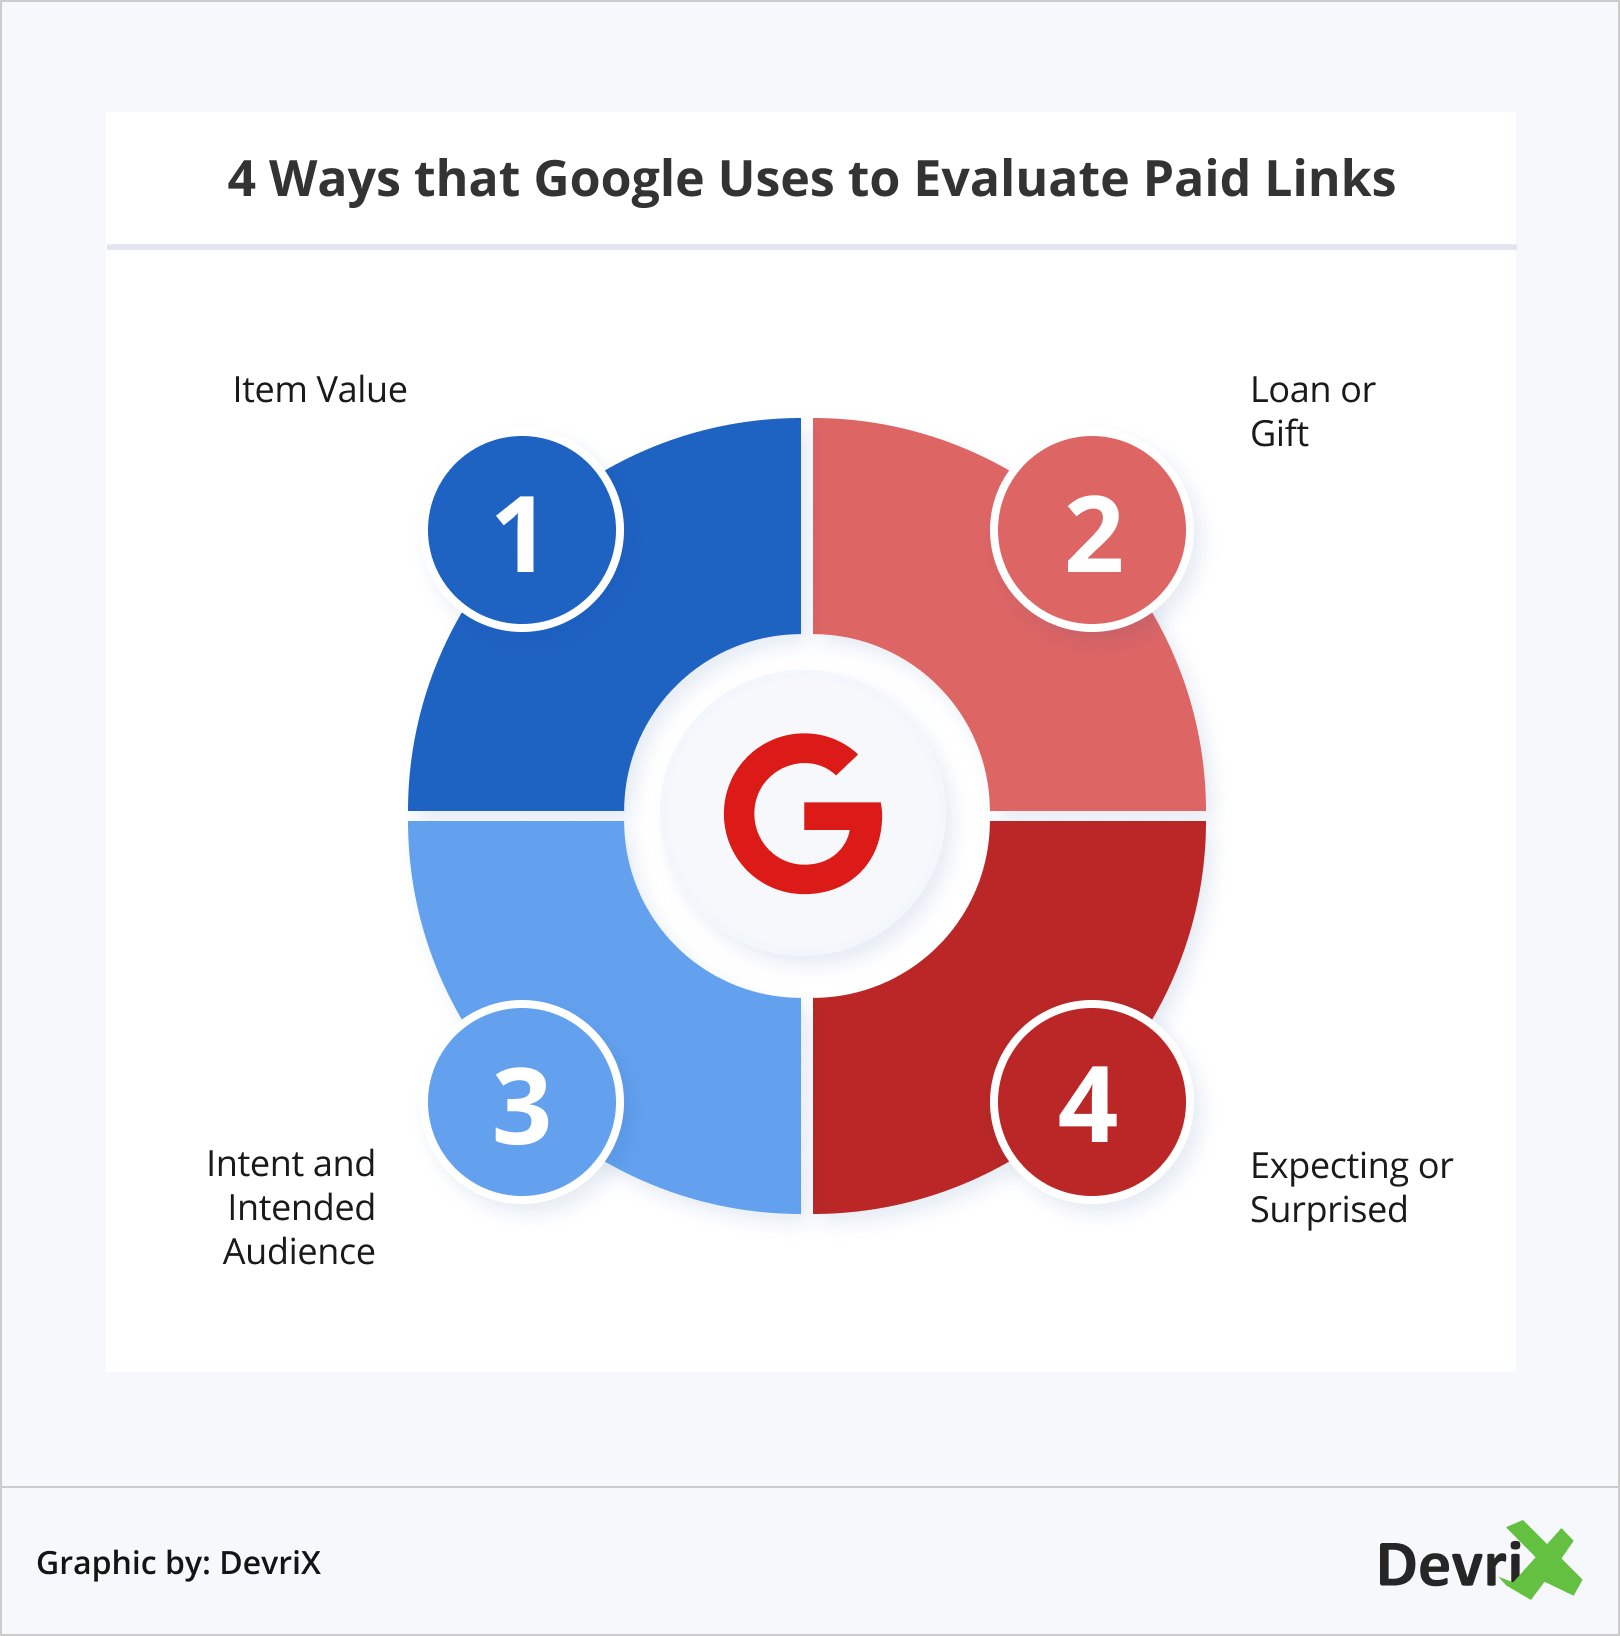 4 Ways that Google Uses to Evaluate Paid Links